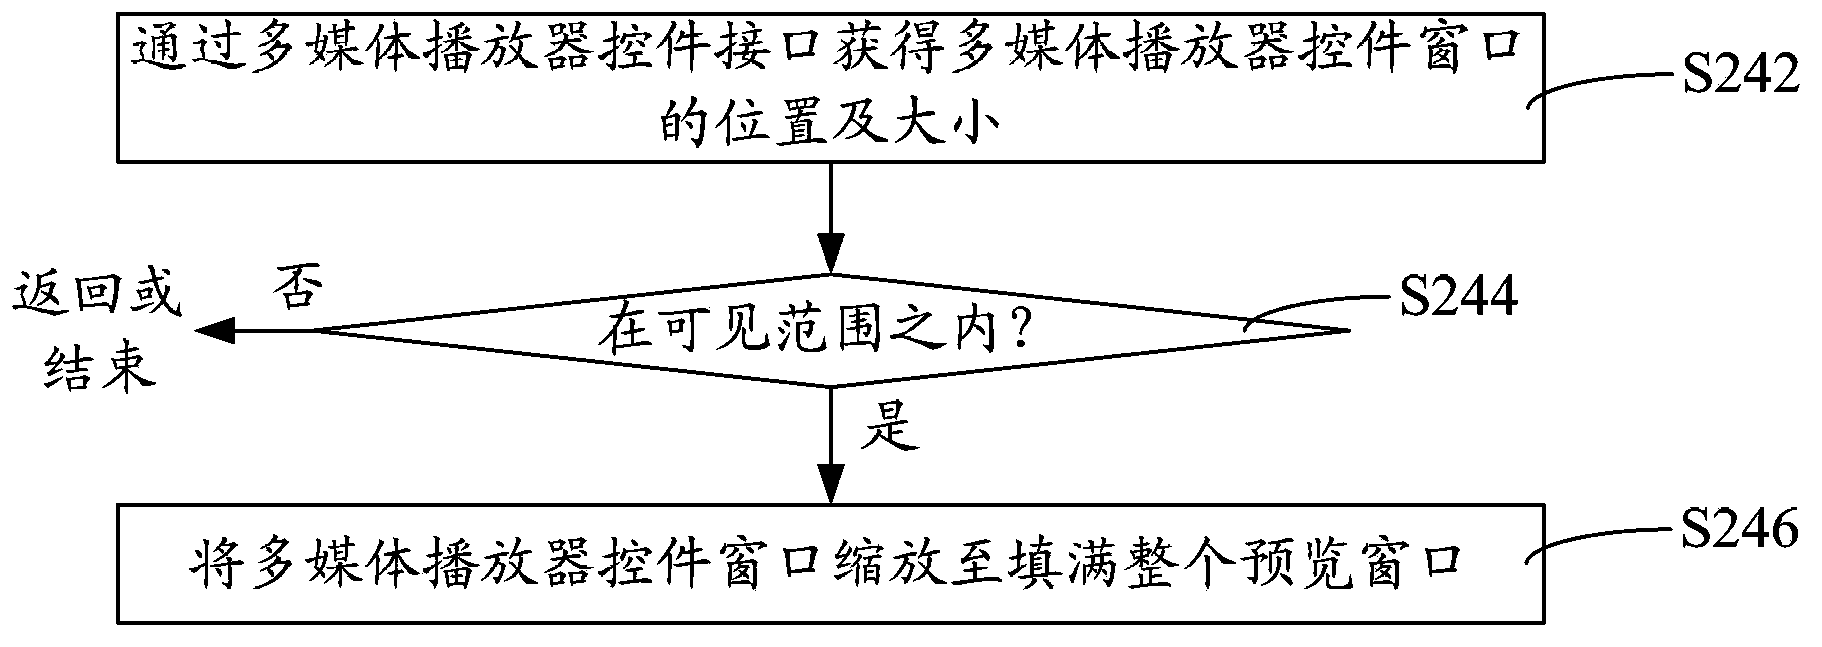 Web page content displaying method and system